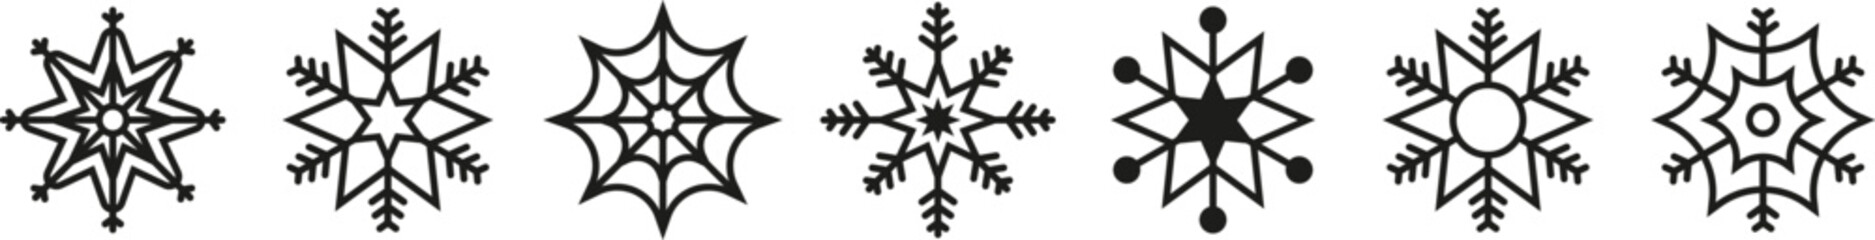 Collection of snowflakes. Snowflake shapes. Vector illustration